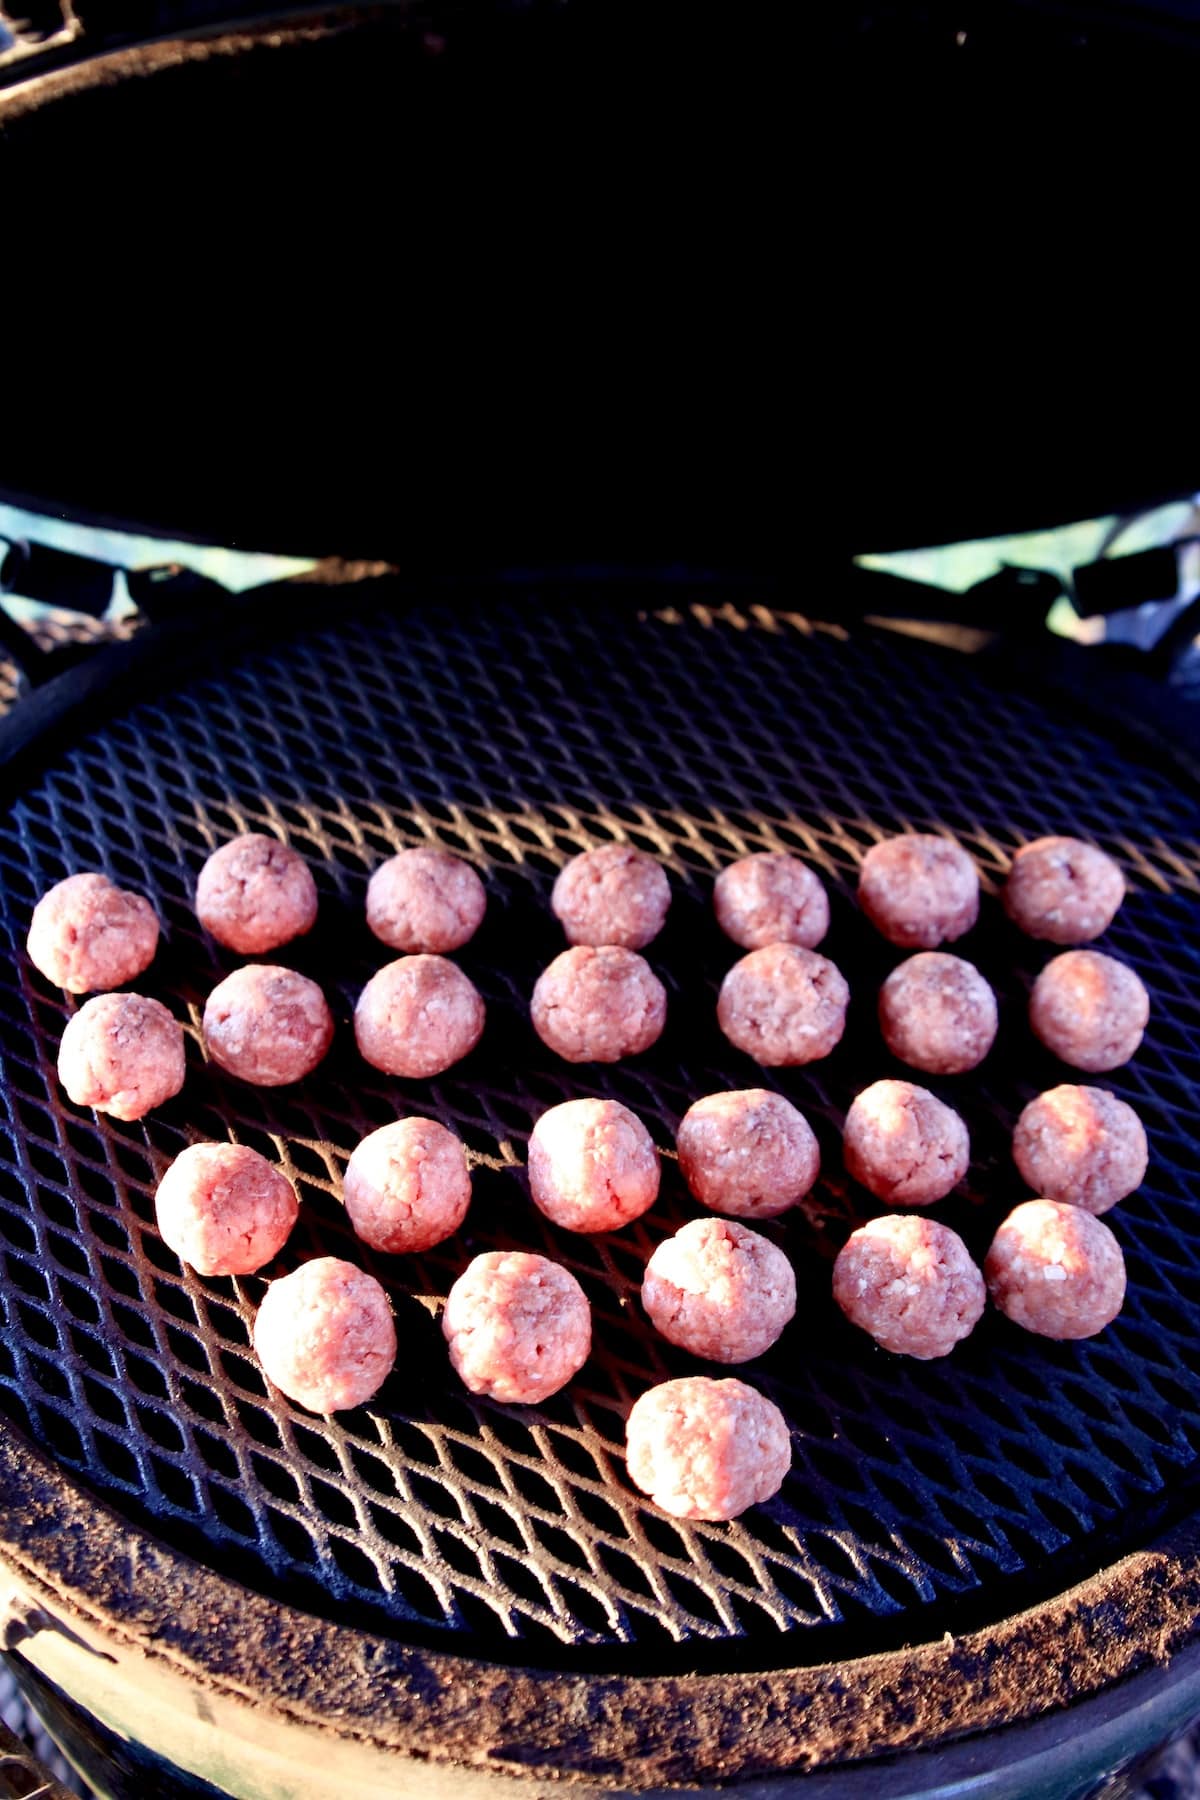 Venison meatballs on a grill.